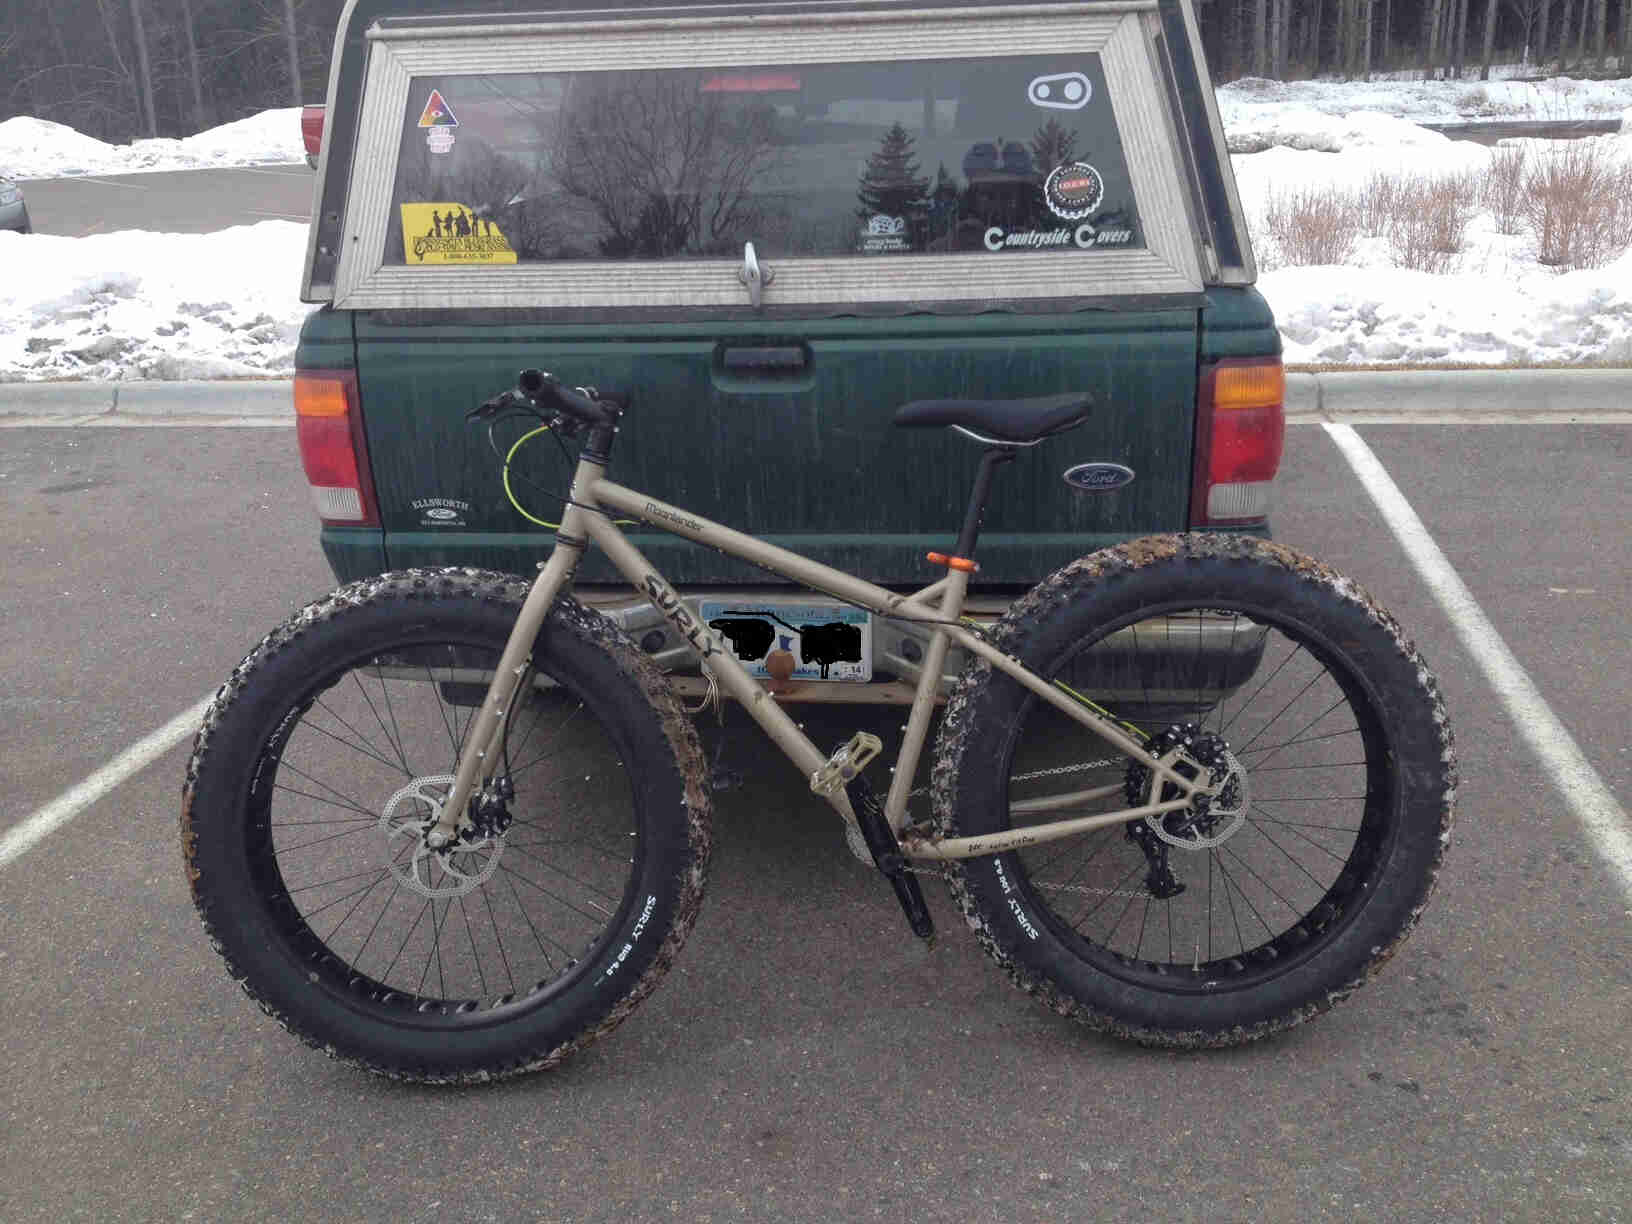 Left side view of a tan Surly Moonlander fat bike, leaning against the tailgate of a pickup, in a paved parking lot spot